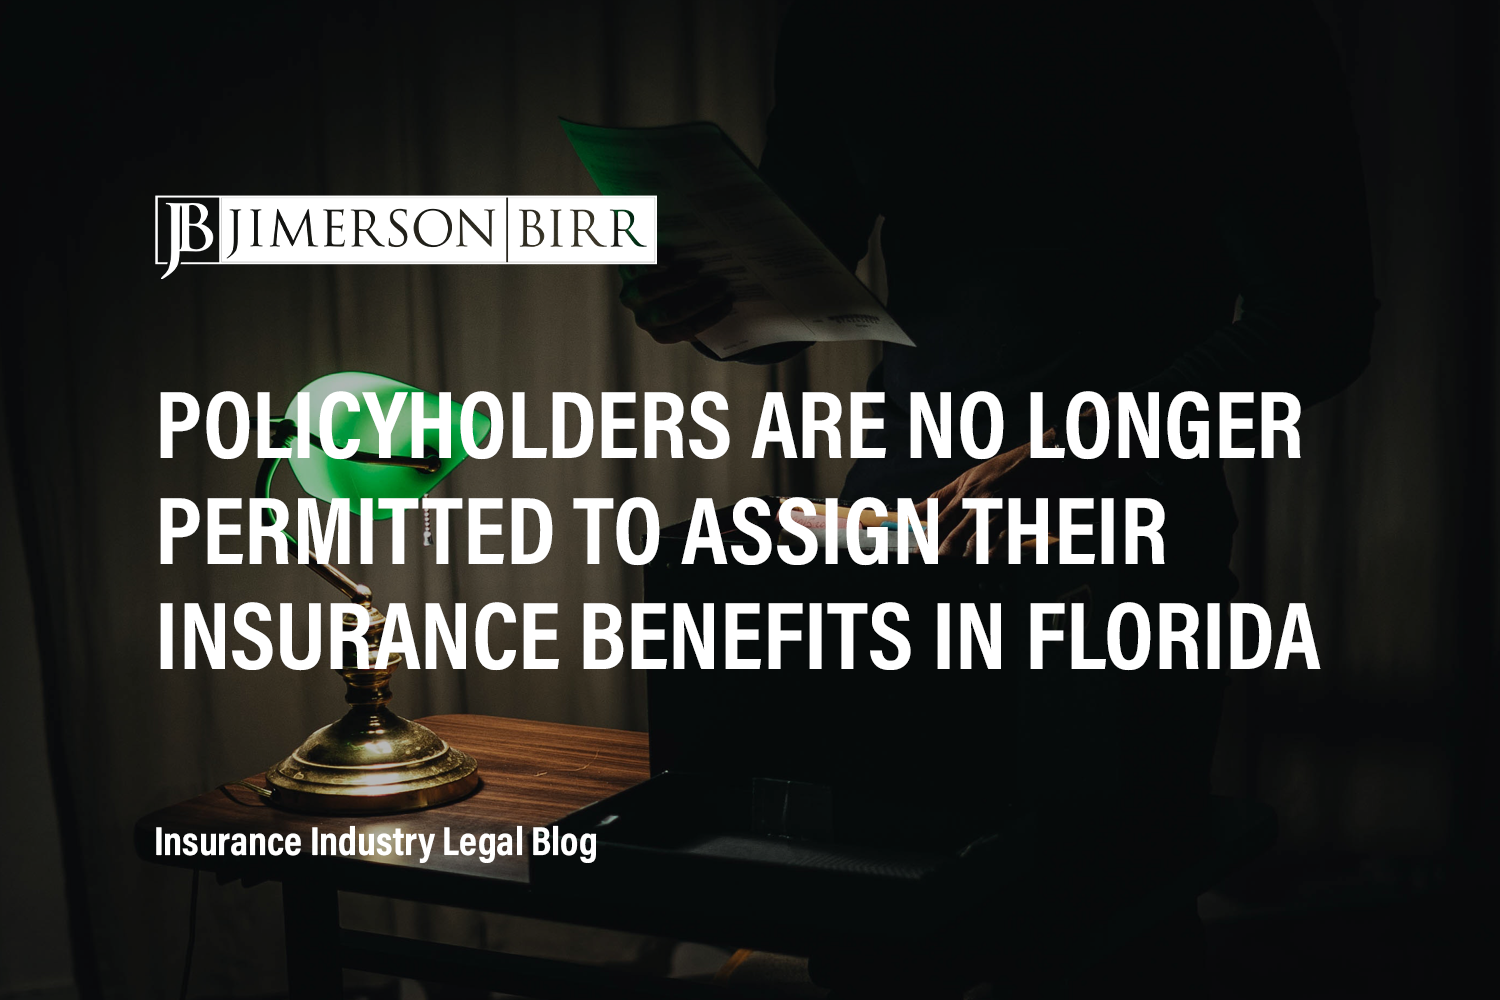 Policyholders Are No Longer Permitted To Assign Their Insurance Benefits in Florida